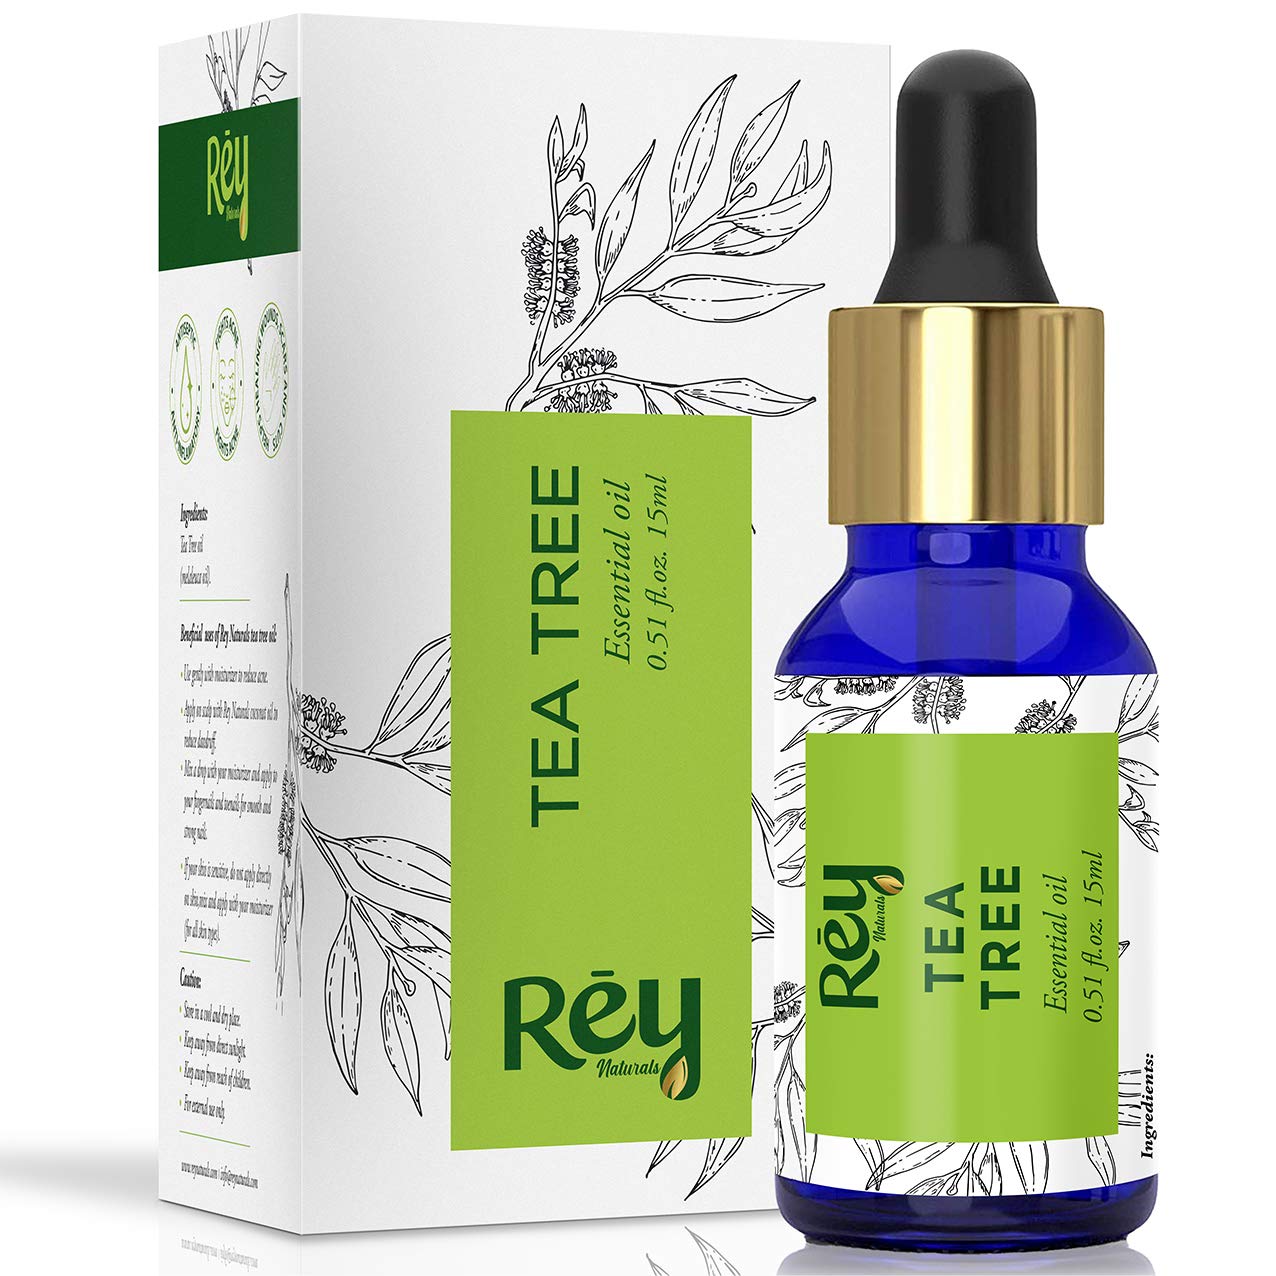 Rey Naturals Tea Tree Oil | Tea Tree Essential Oil for Hair, Skin and Face Care - 100% Pure Tea Tree Oil for Dandruff, Acne, Aromatherapy, Stress, and More - 15ml